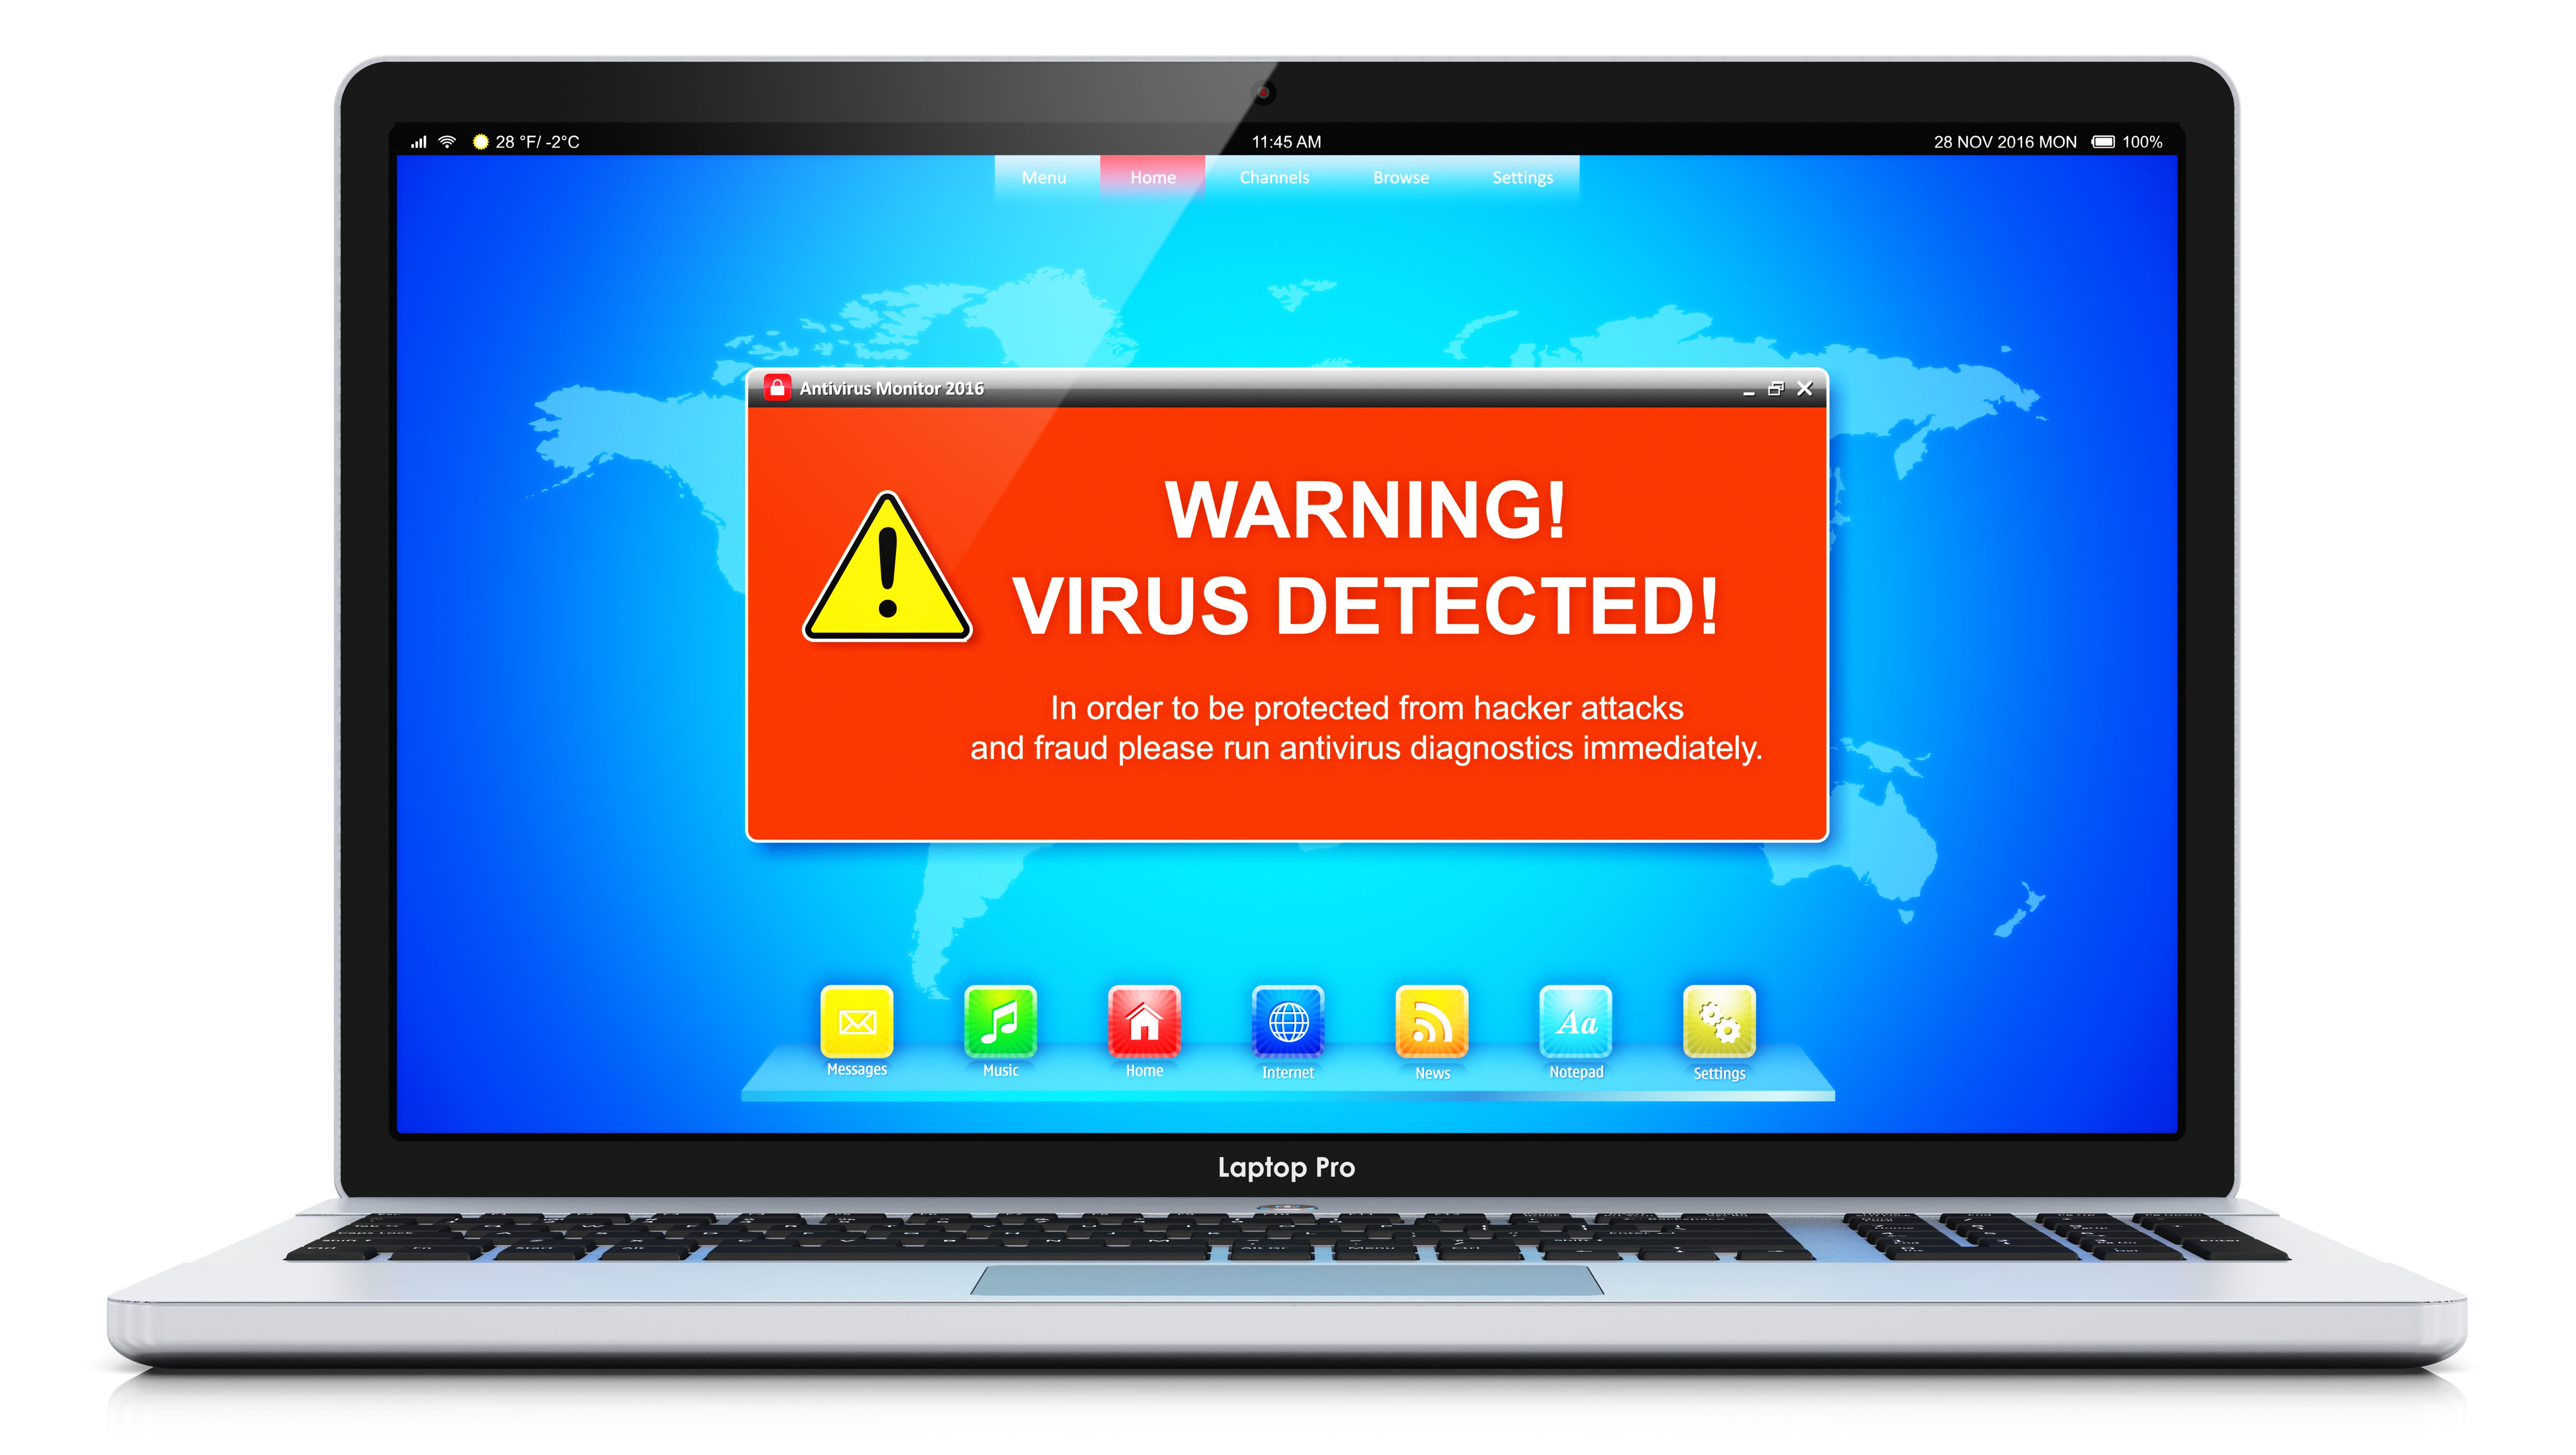 Computer do get rid of a warning about viruses?